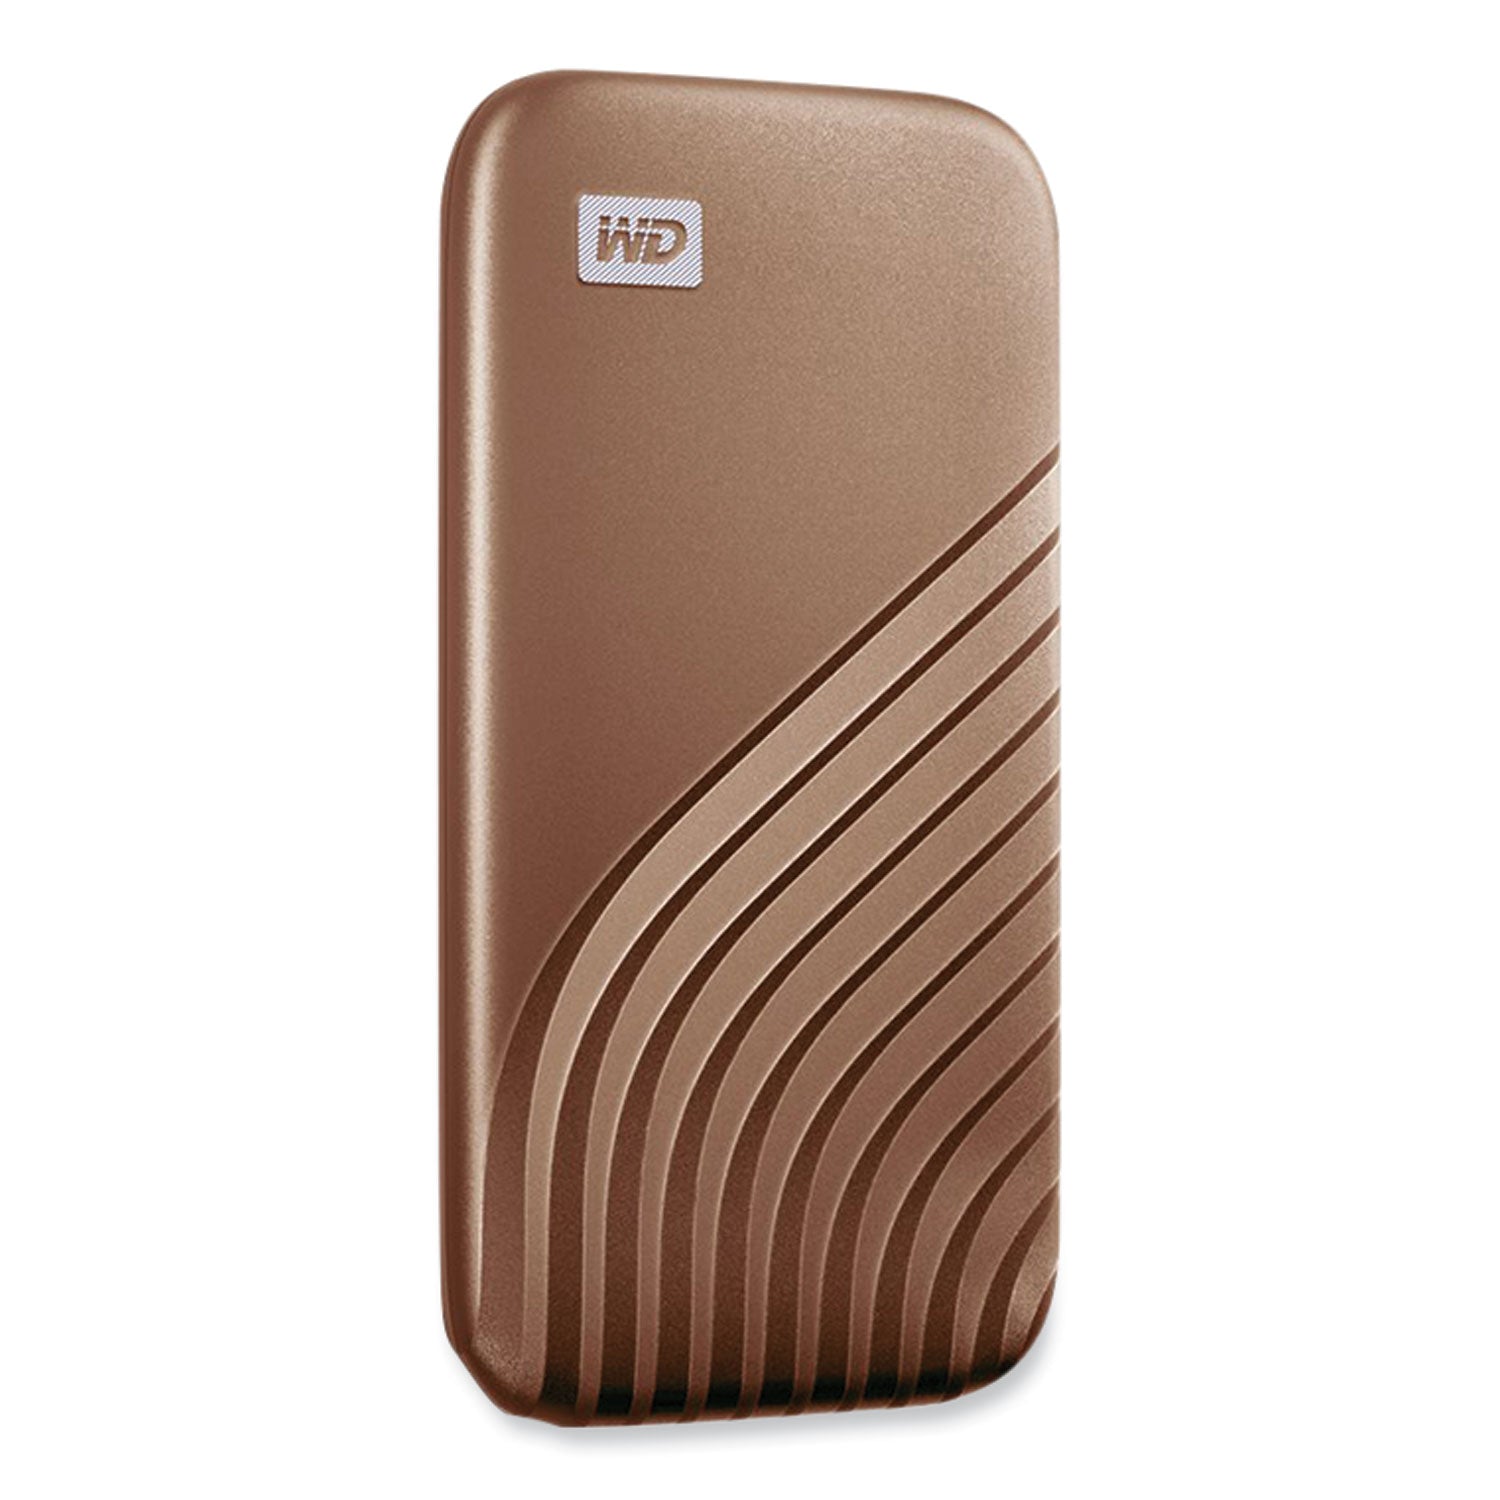 my-passport-external-solid-state-drive-2-tb-usb-32-gold_wdcagf0020bgd - 2